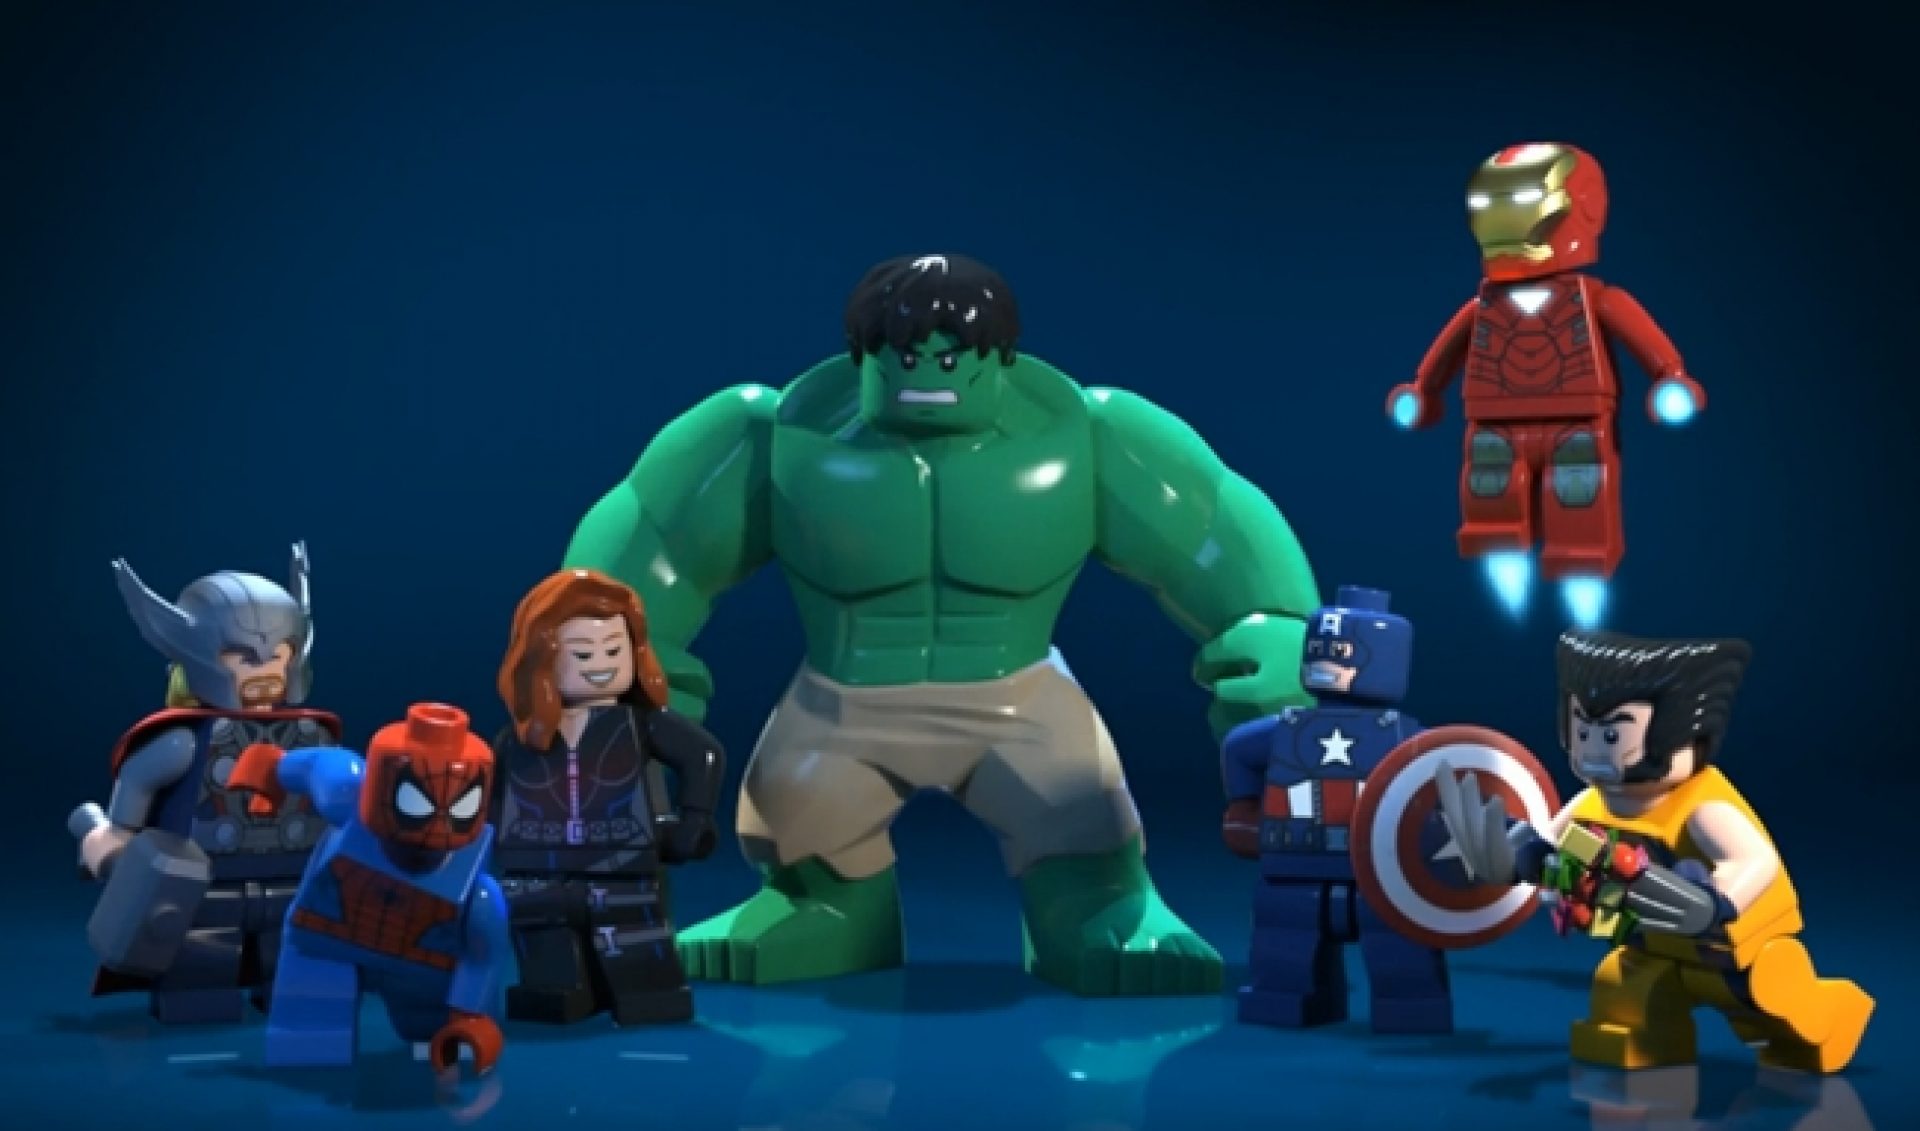 The Marvel Superheroes Come To Disney.com…In Lego Form